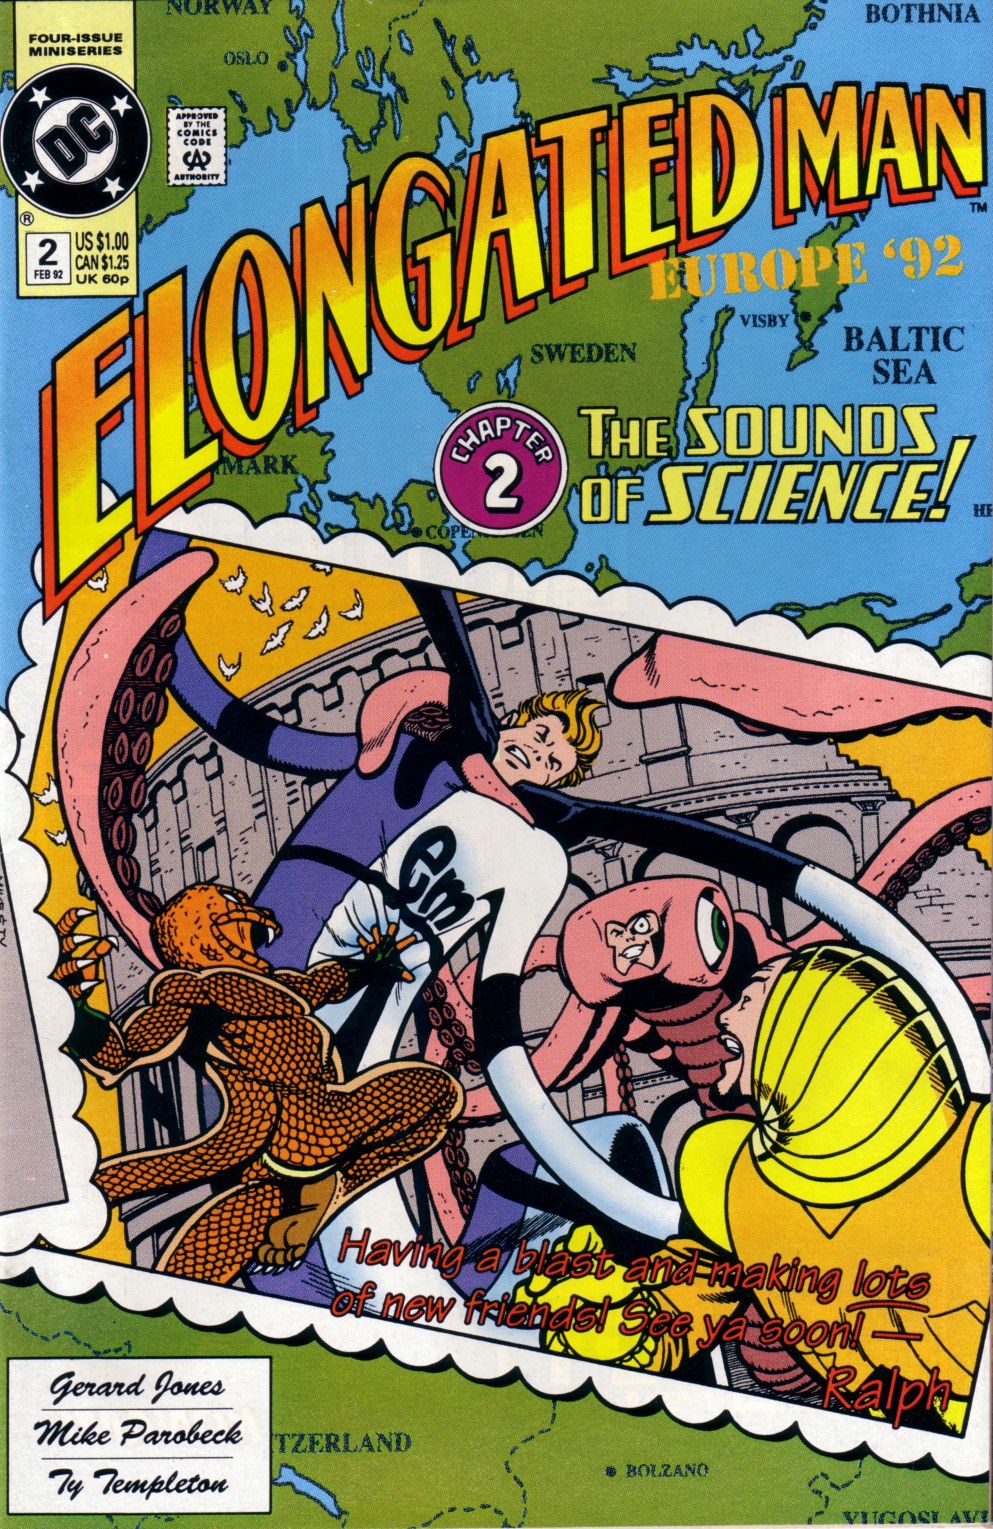 Read online Elongated Man comic -  Issue #2 - 1